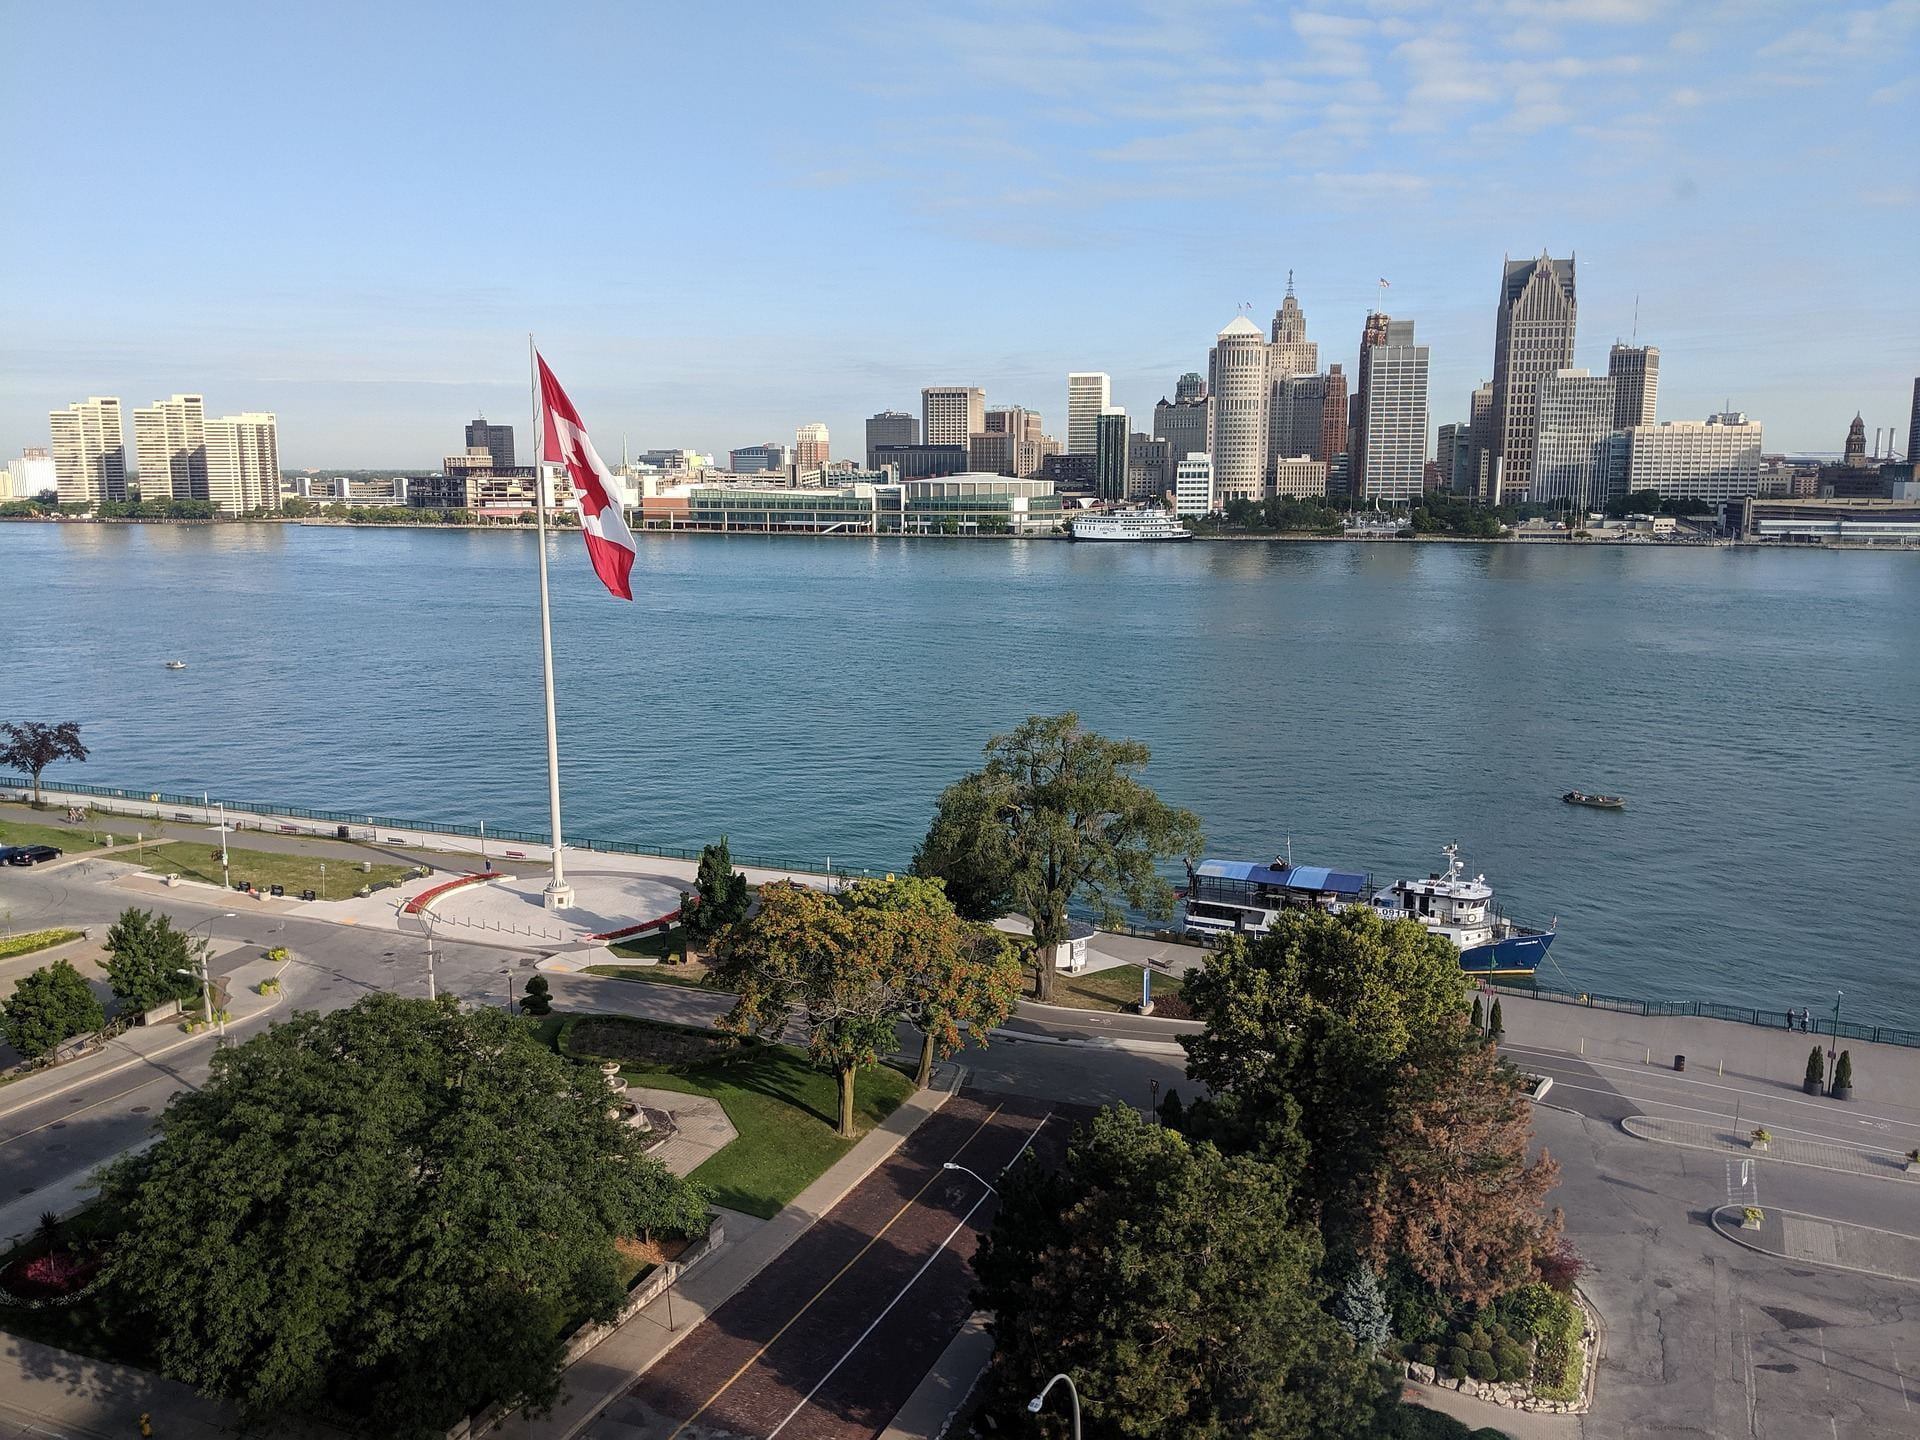 Picture of both the Canadian side and Detroit side of the Detroit river.